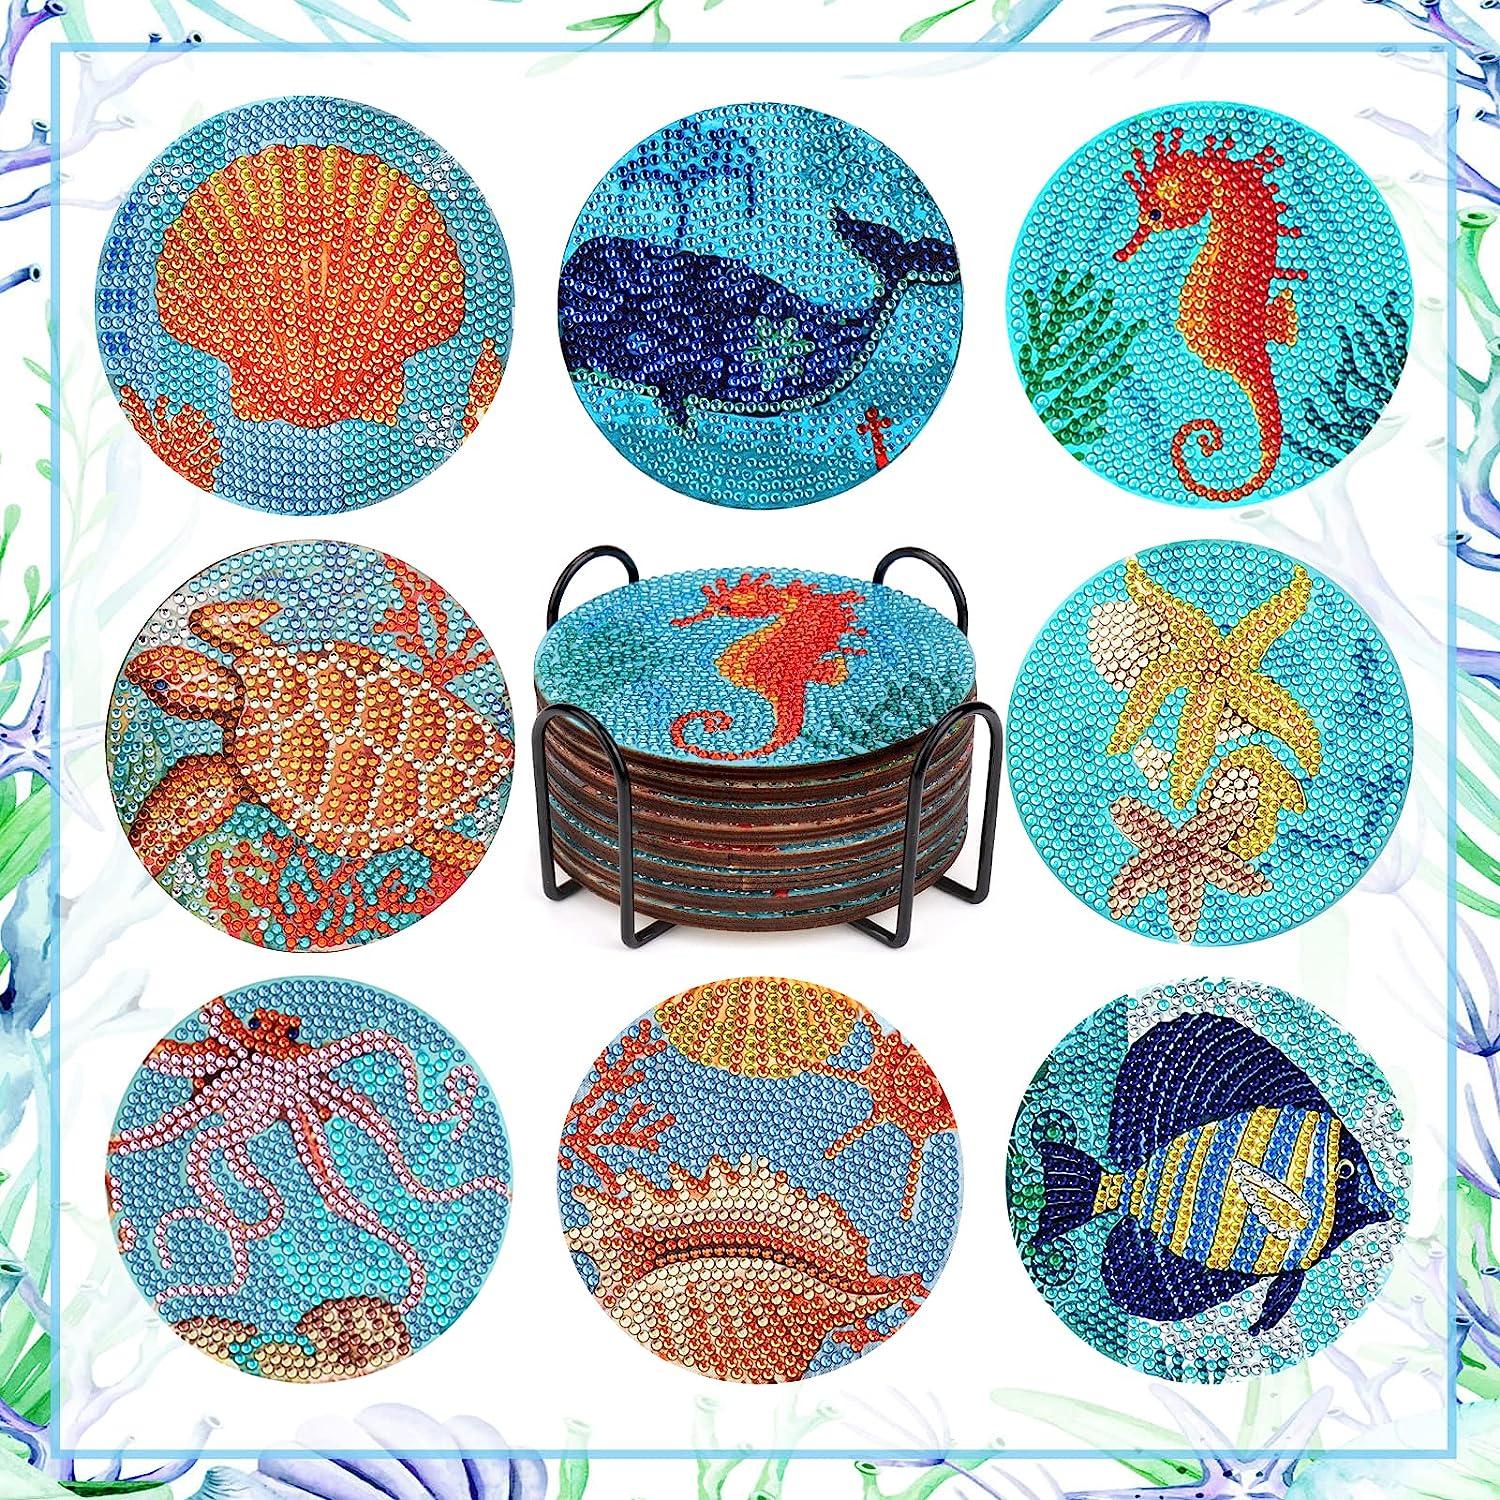 Bouiexye Diamond Painting Coasters Kit, 8pcs Ocean Diamond Art Coasters  with Holder DIY Diamond Art Crafts Supplies for Adults Kids Beginners Beach  House Decor : : Home & Kitchen